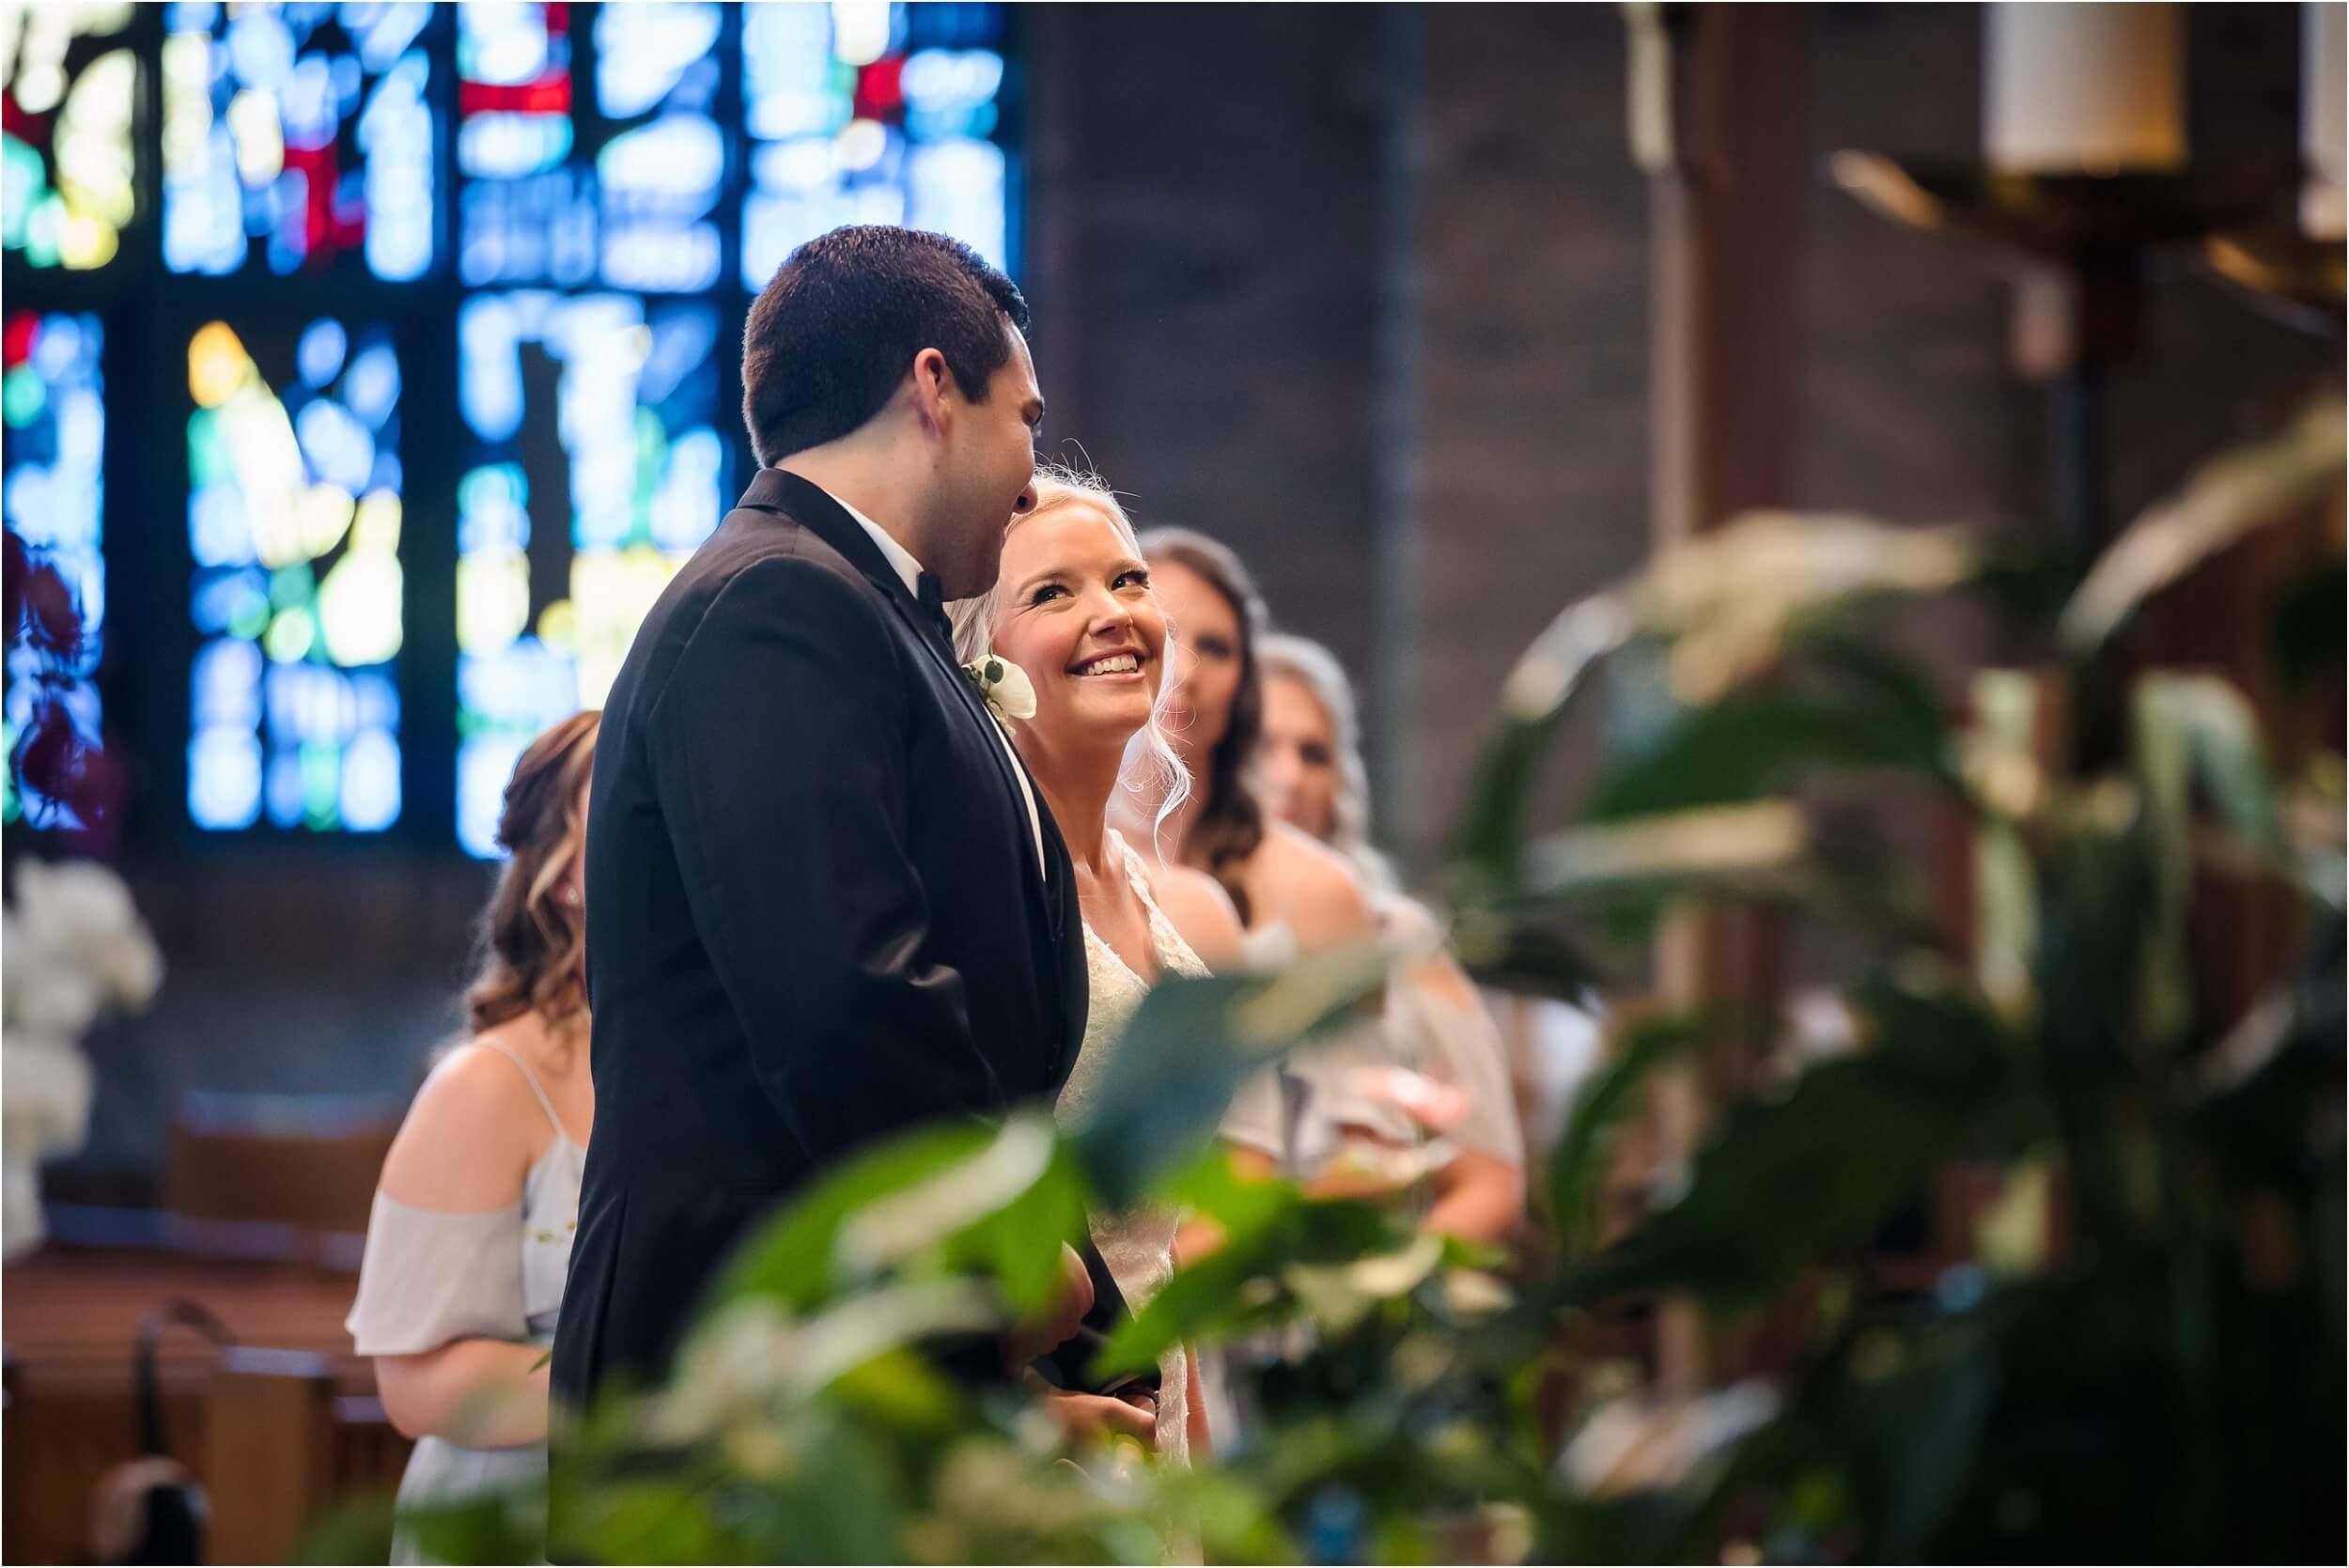  A bride lovingly looks at her soon-to-be husband during their wedding ceremony.  